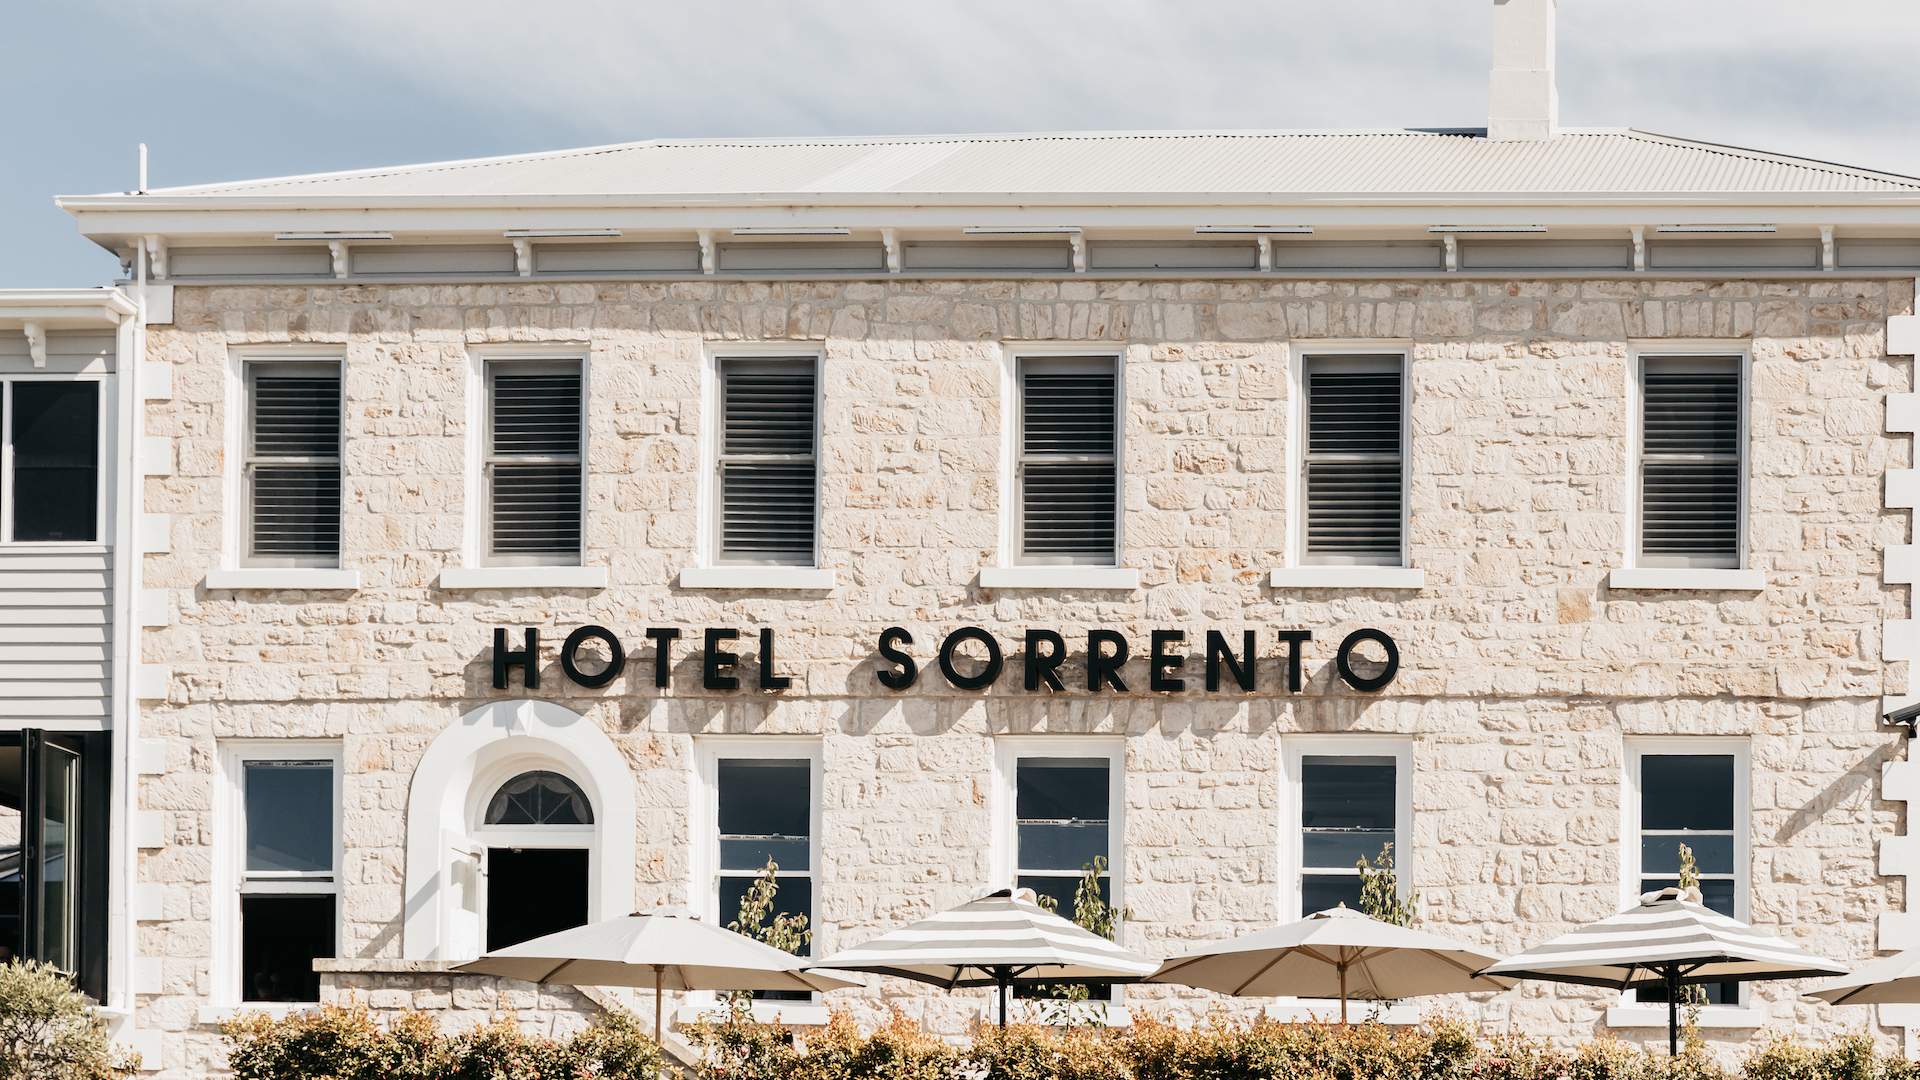 Hotel Sorrento Is Now Taking Bookings Following a Major Makeover with New Luxe Suites, Mega Pool and a Day Spa